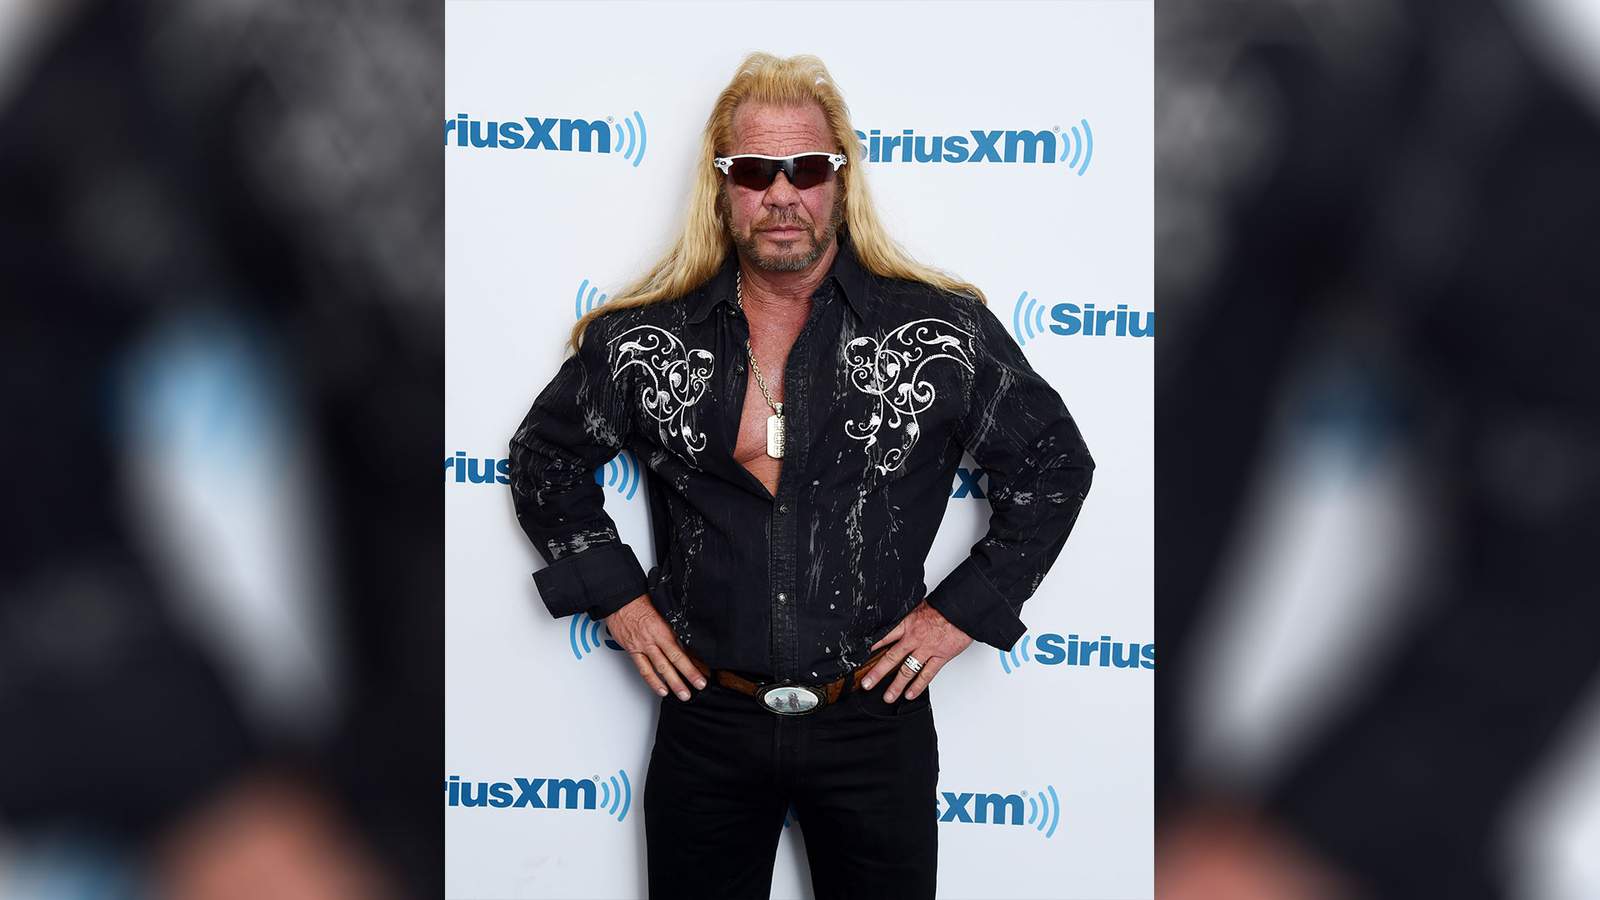 Dog the Bounty Hunter comes to Virginia, fugitive now in jail